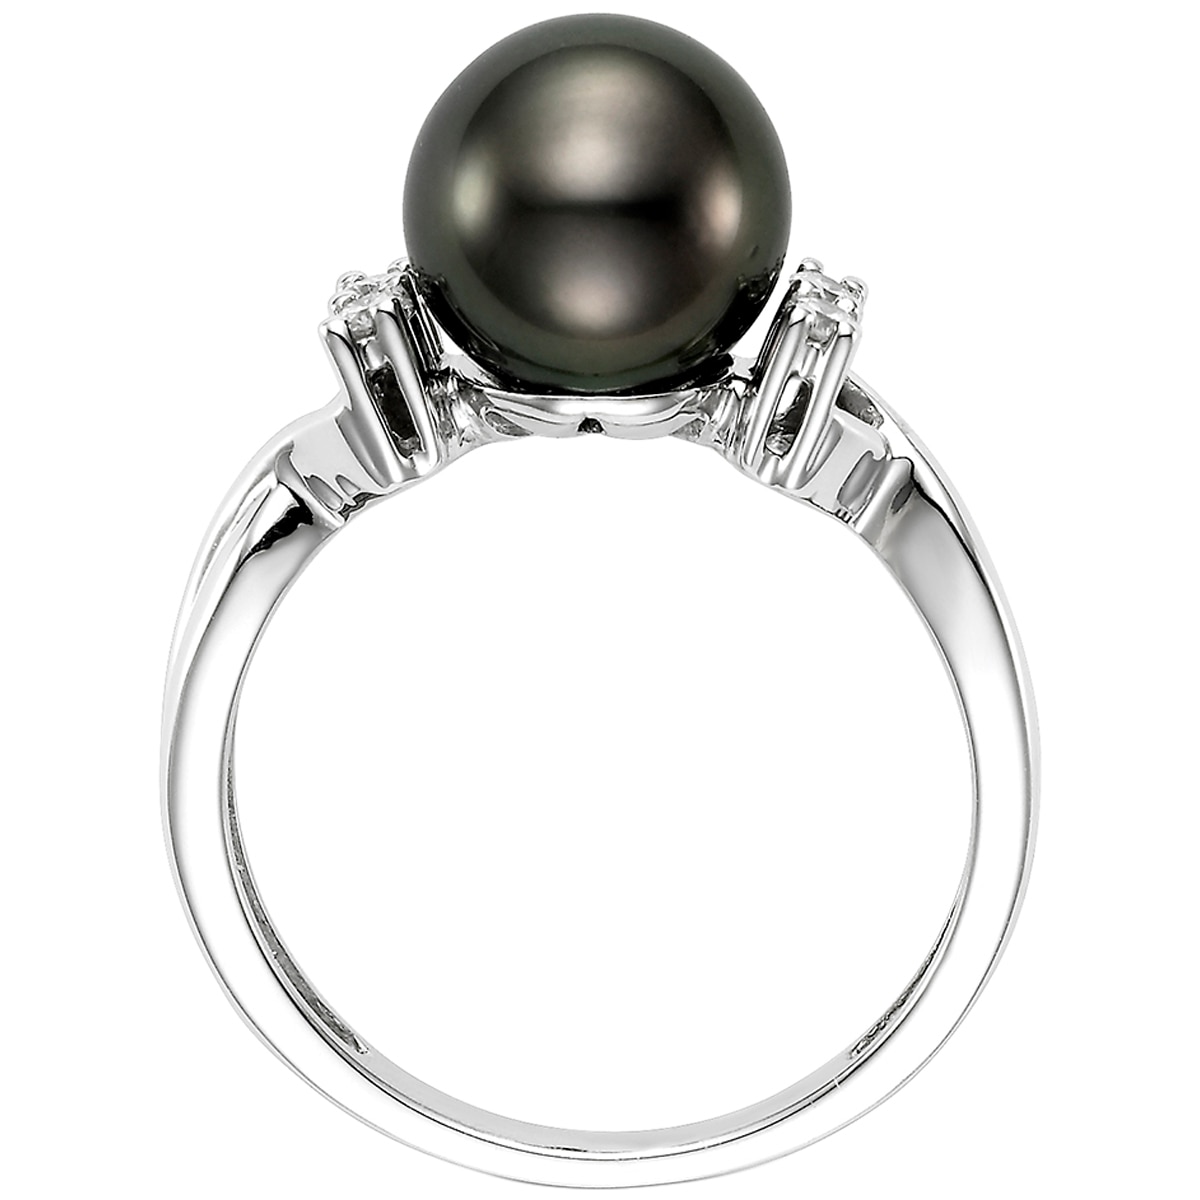 18KT White Gold Tahitian Pearl and Diamond Ring